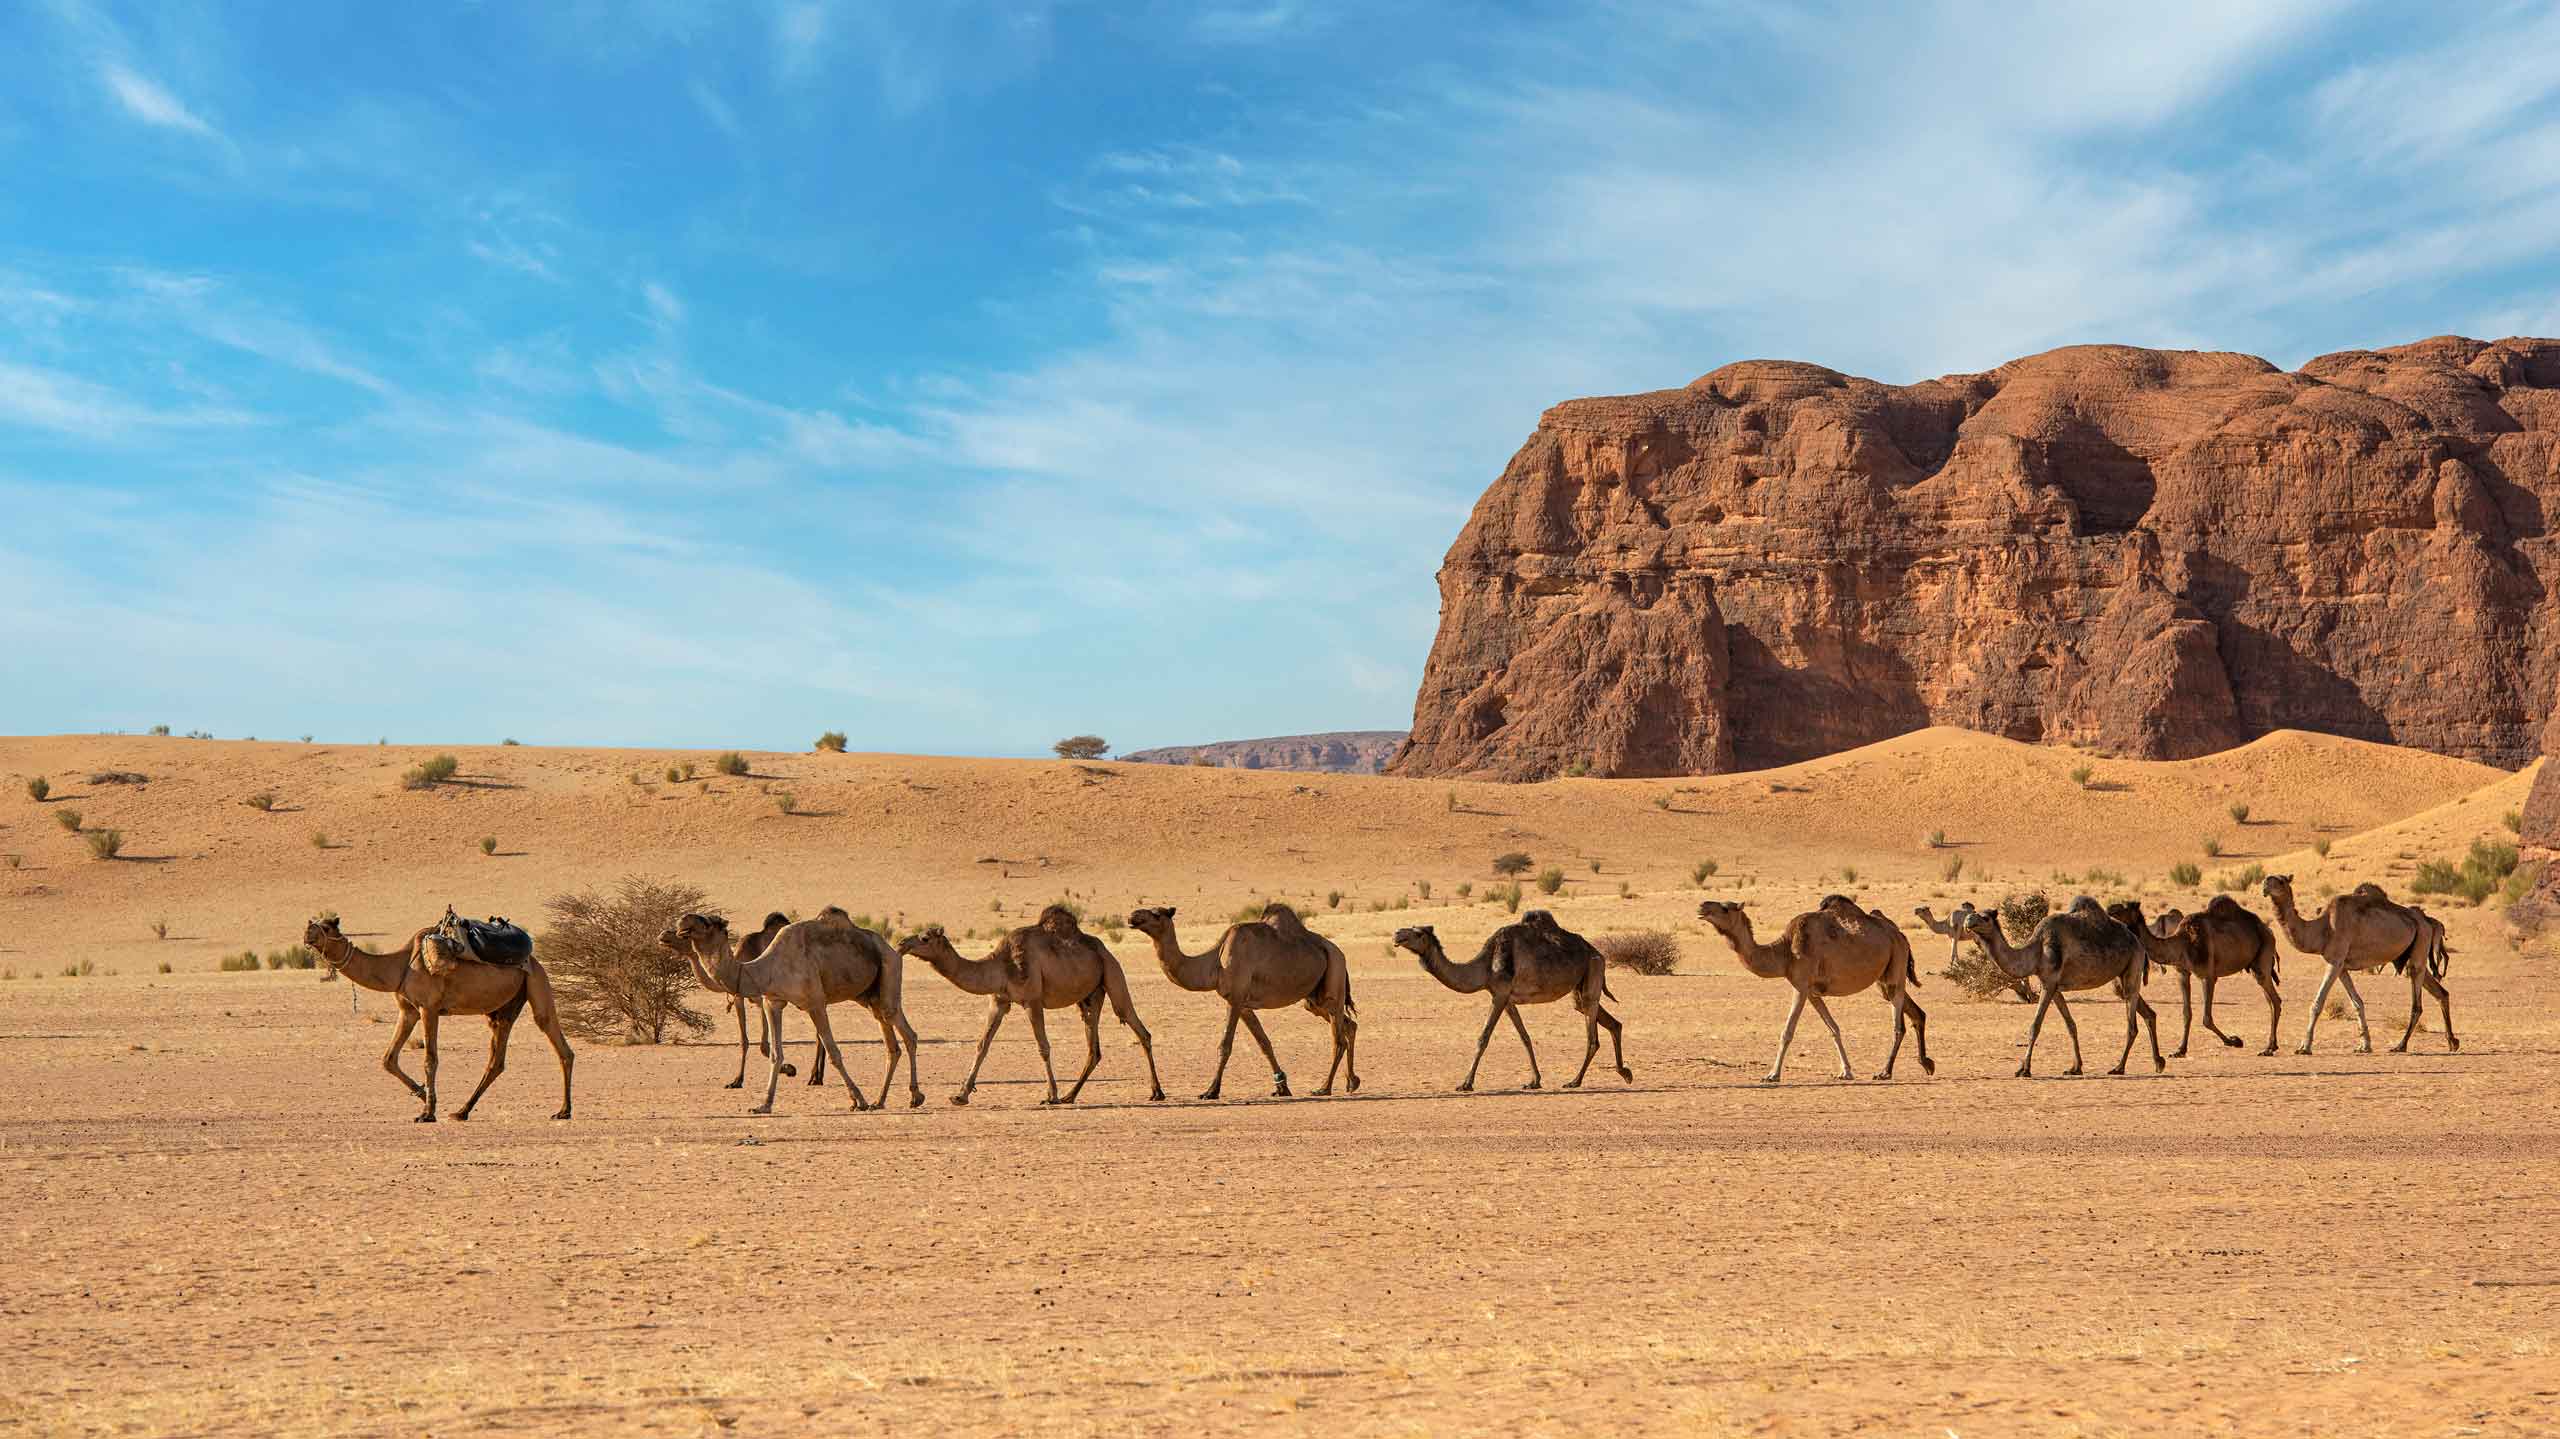 Train of camels in Chad Ennedi desert on small group journey